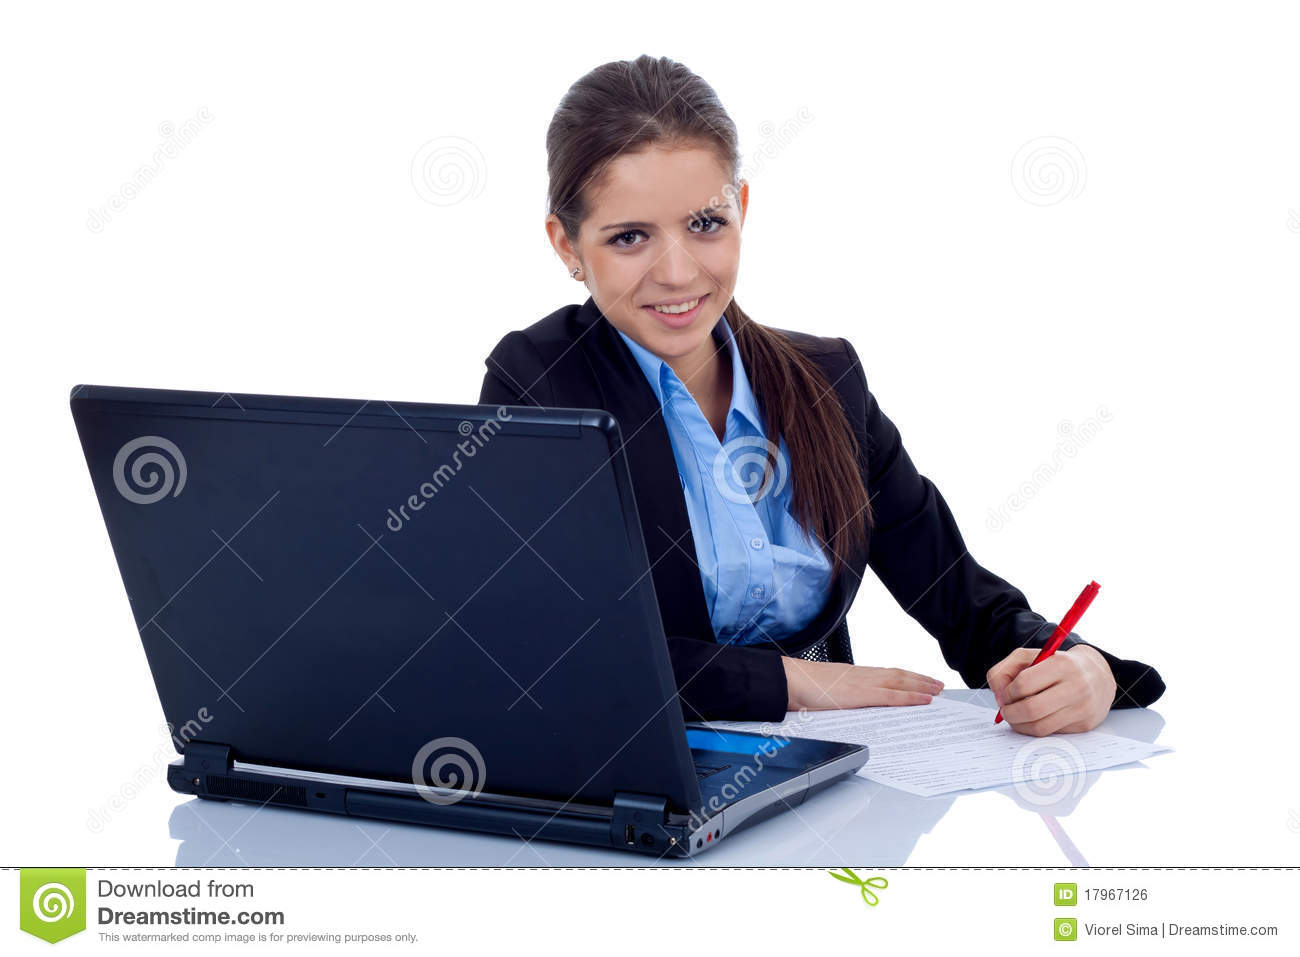 Business Woman Working At Her Desk Royalty Free Stock Image   Image